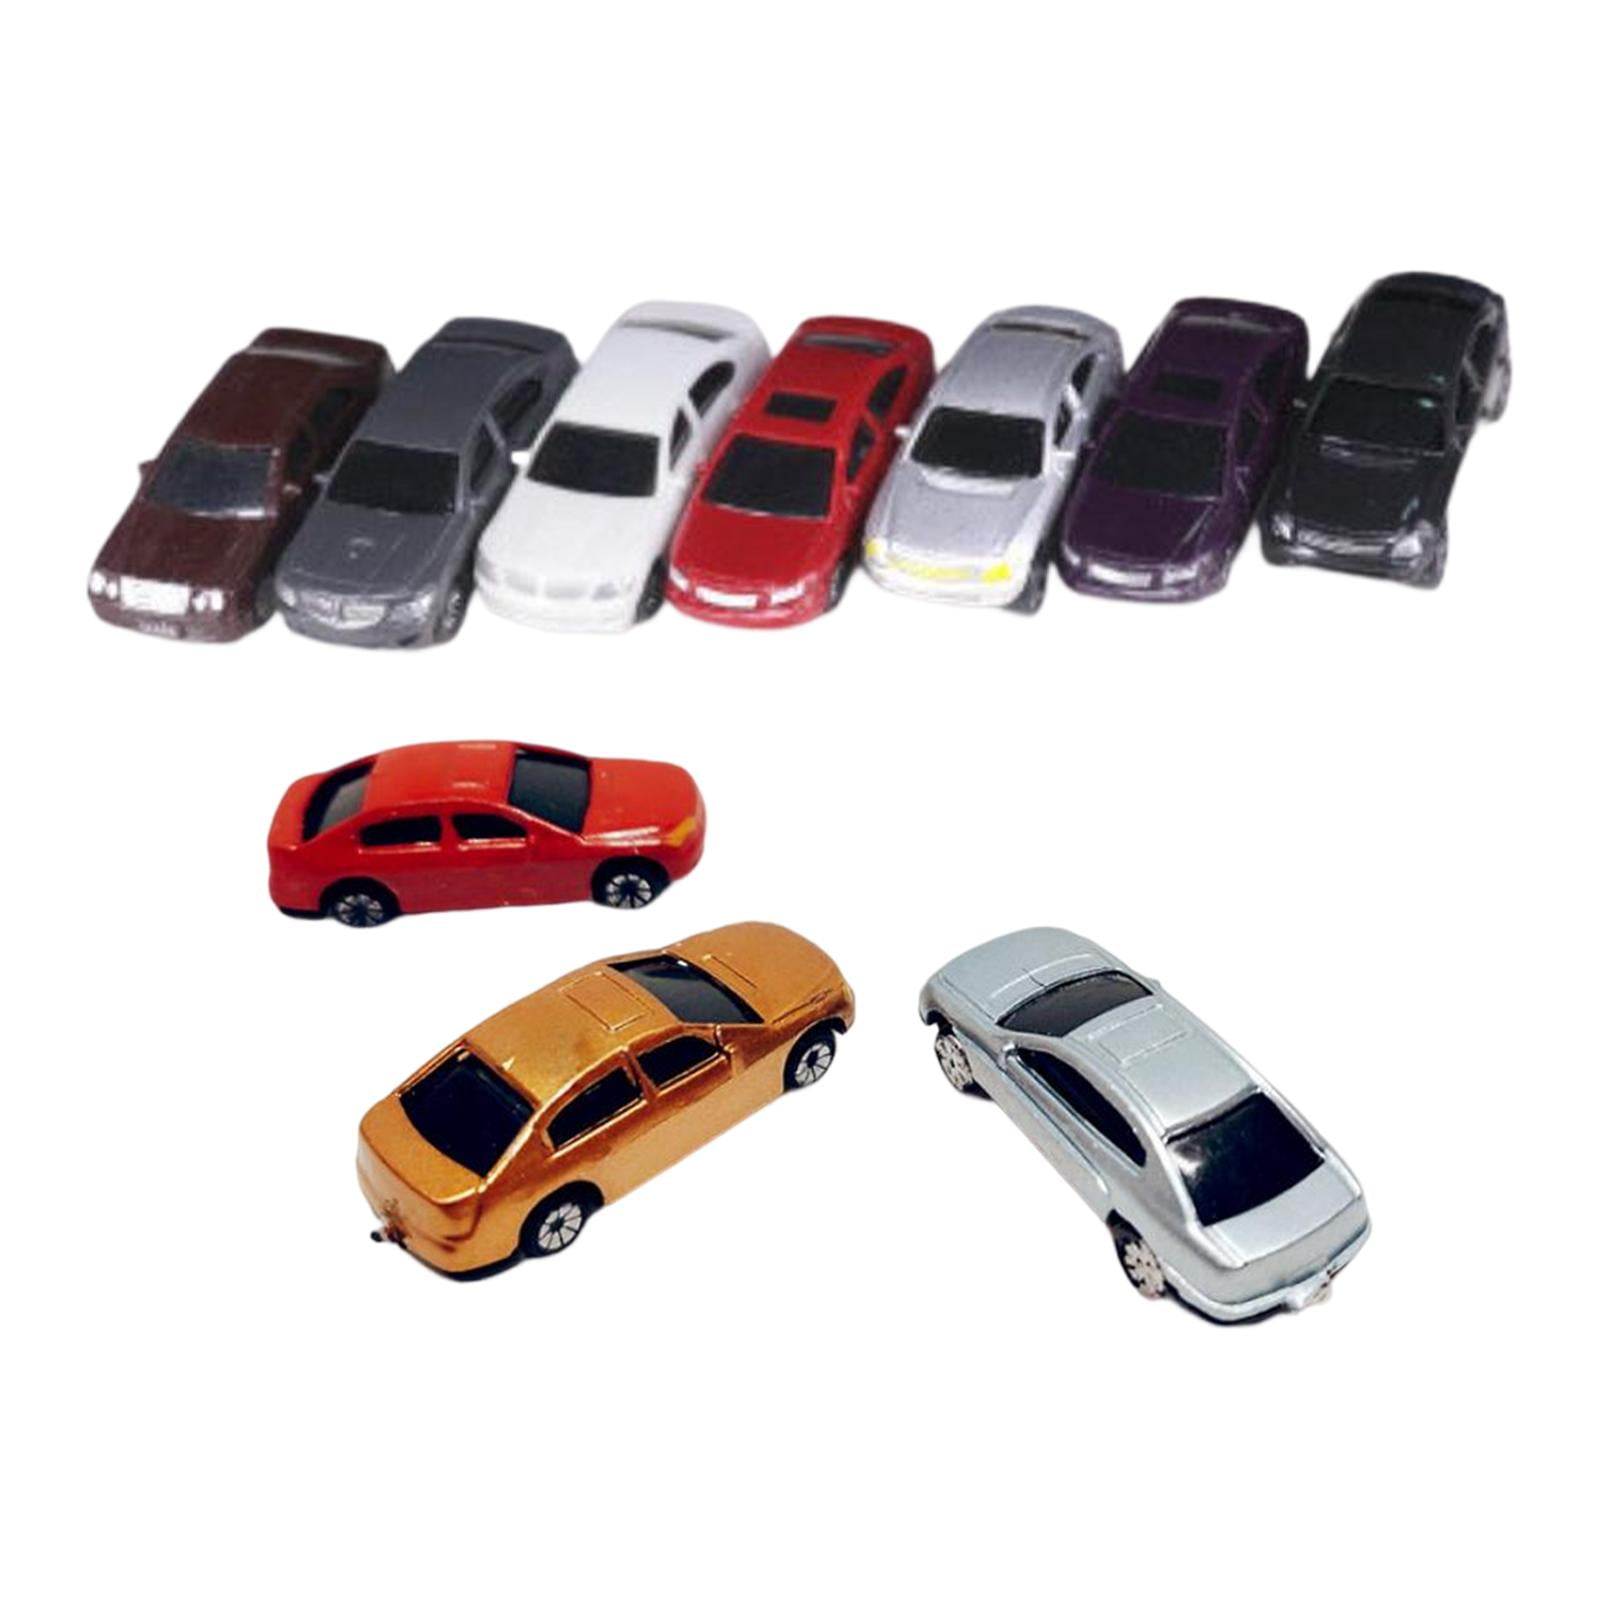 Diecast Skill 2 Model Kit Garage Accessory Set #2 with 2 Figures Tip Top Shop 1/25 Scale Model by AMT